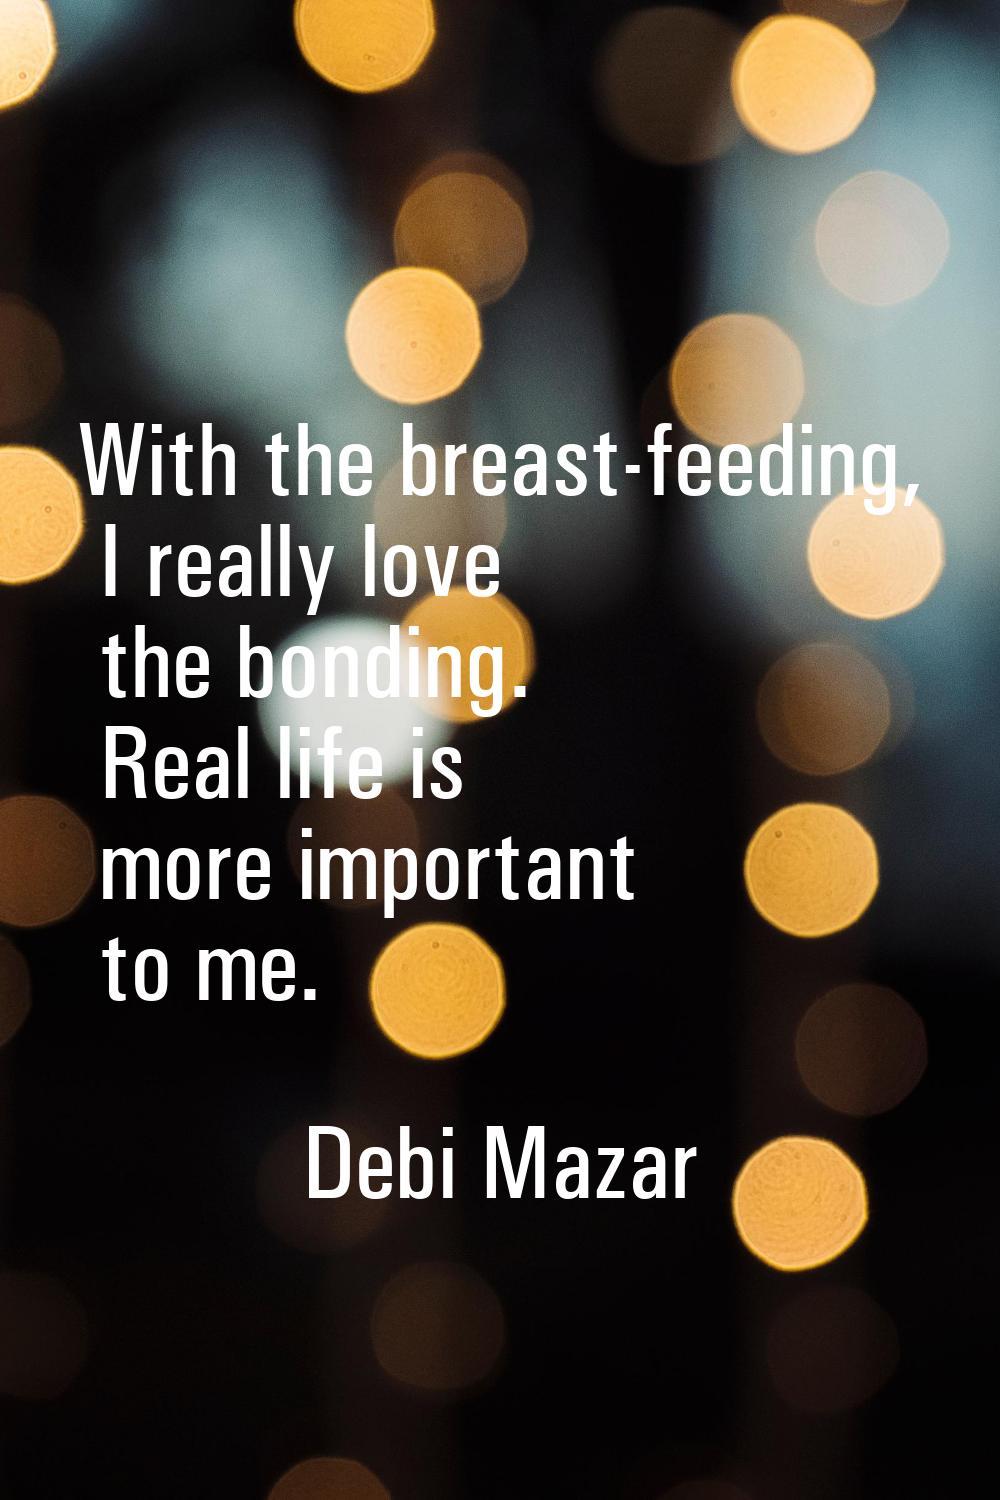 With the breast-feeding, I really love the bonding. Real life is more important to me.